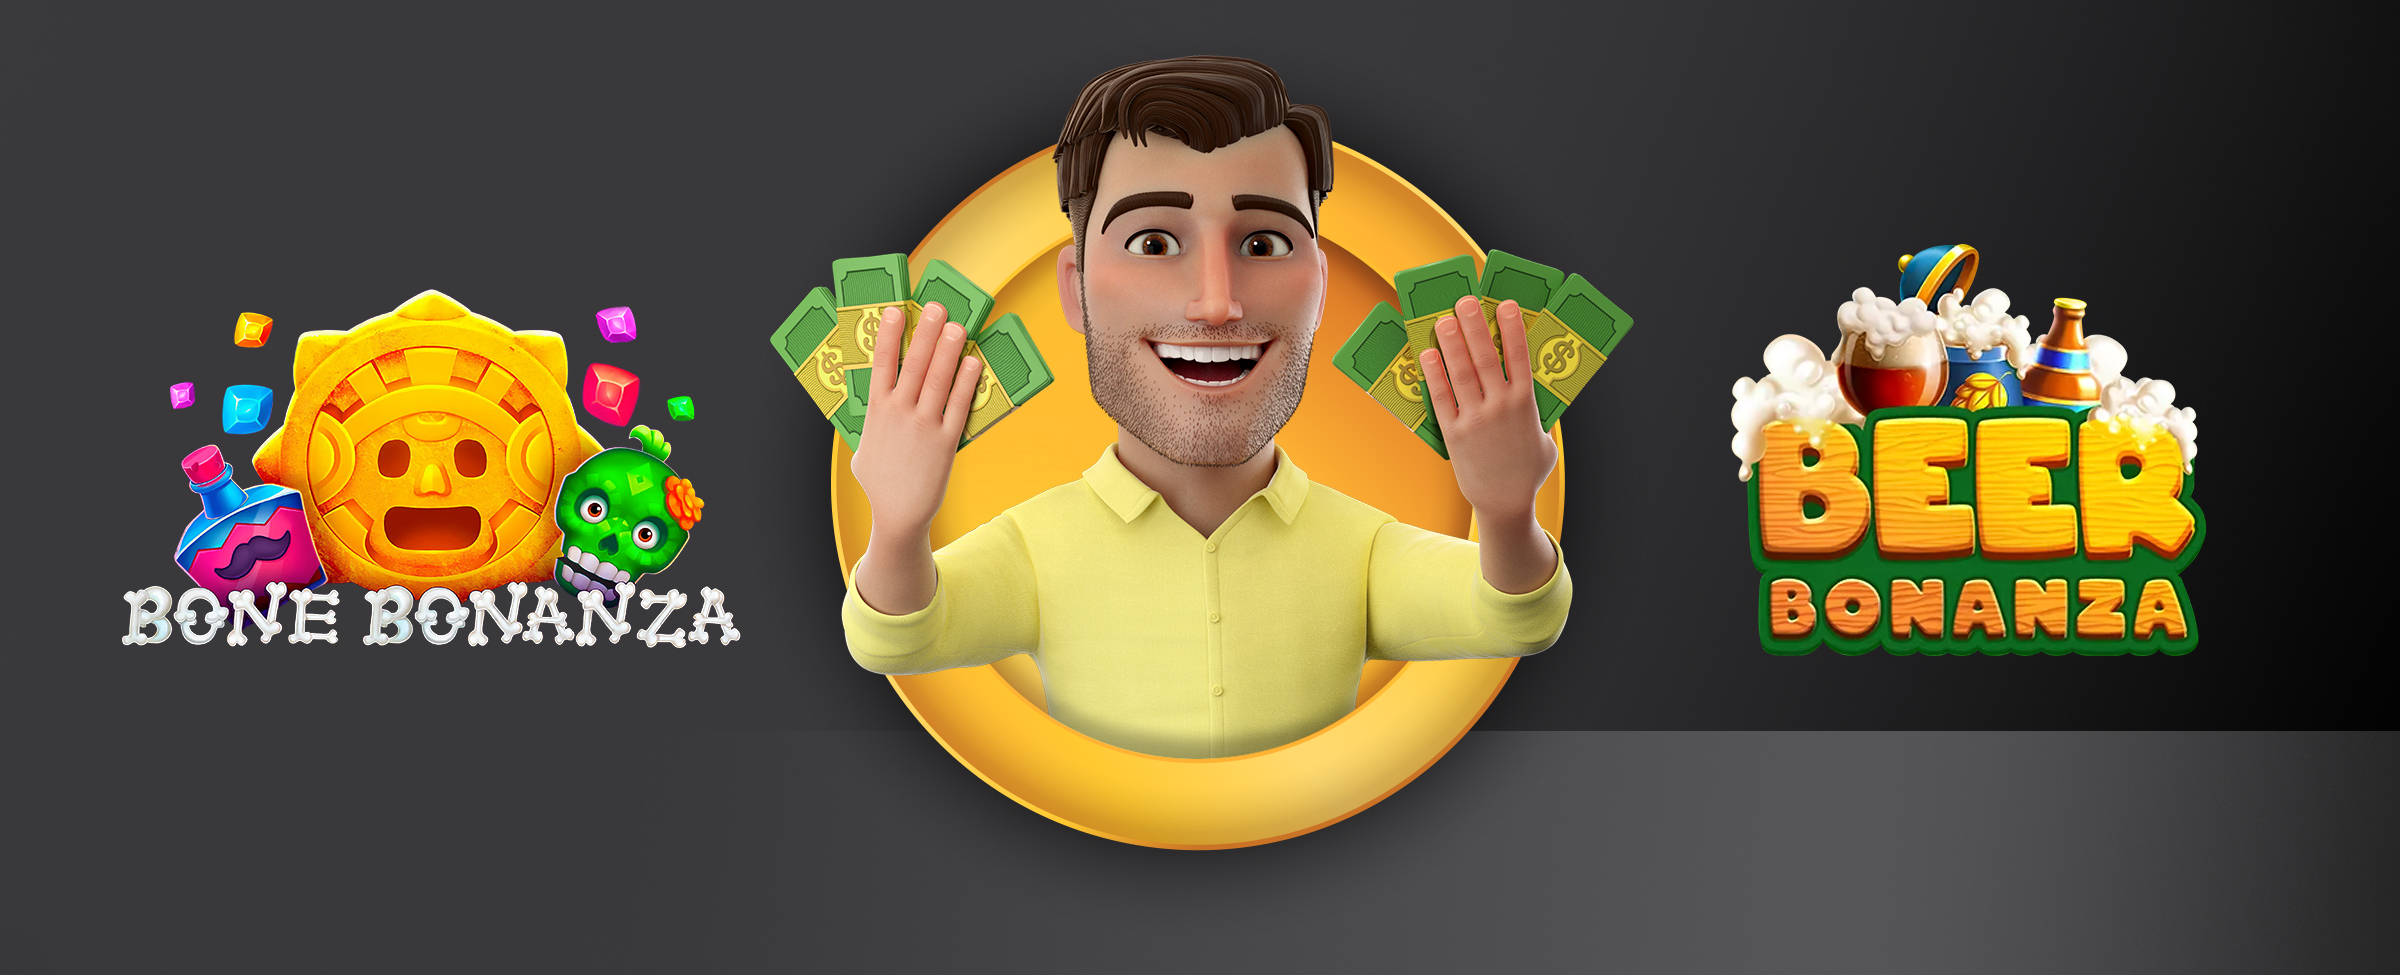 The Joe Fortune character holding wads of cash bills in each hand with the Bone Bonanza and Beer Bonanza logos on a dark background.